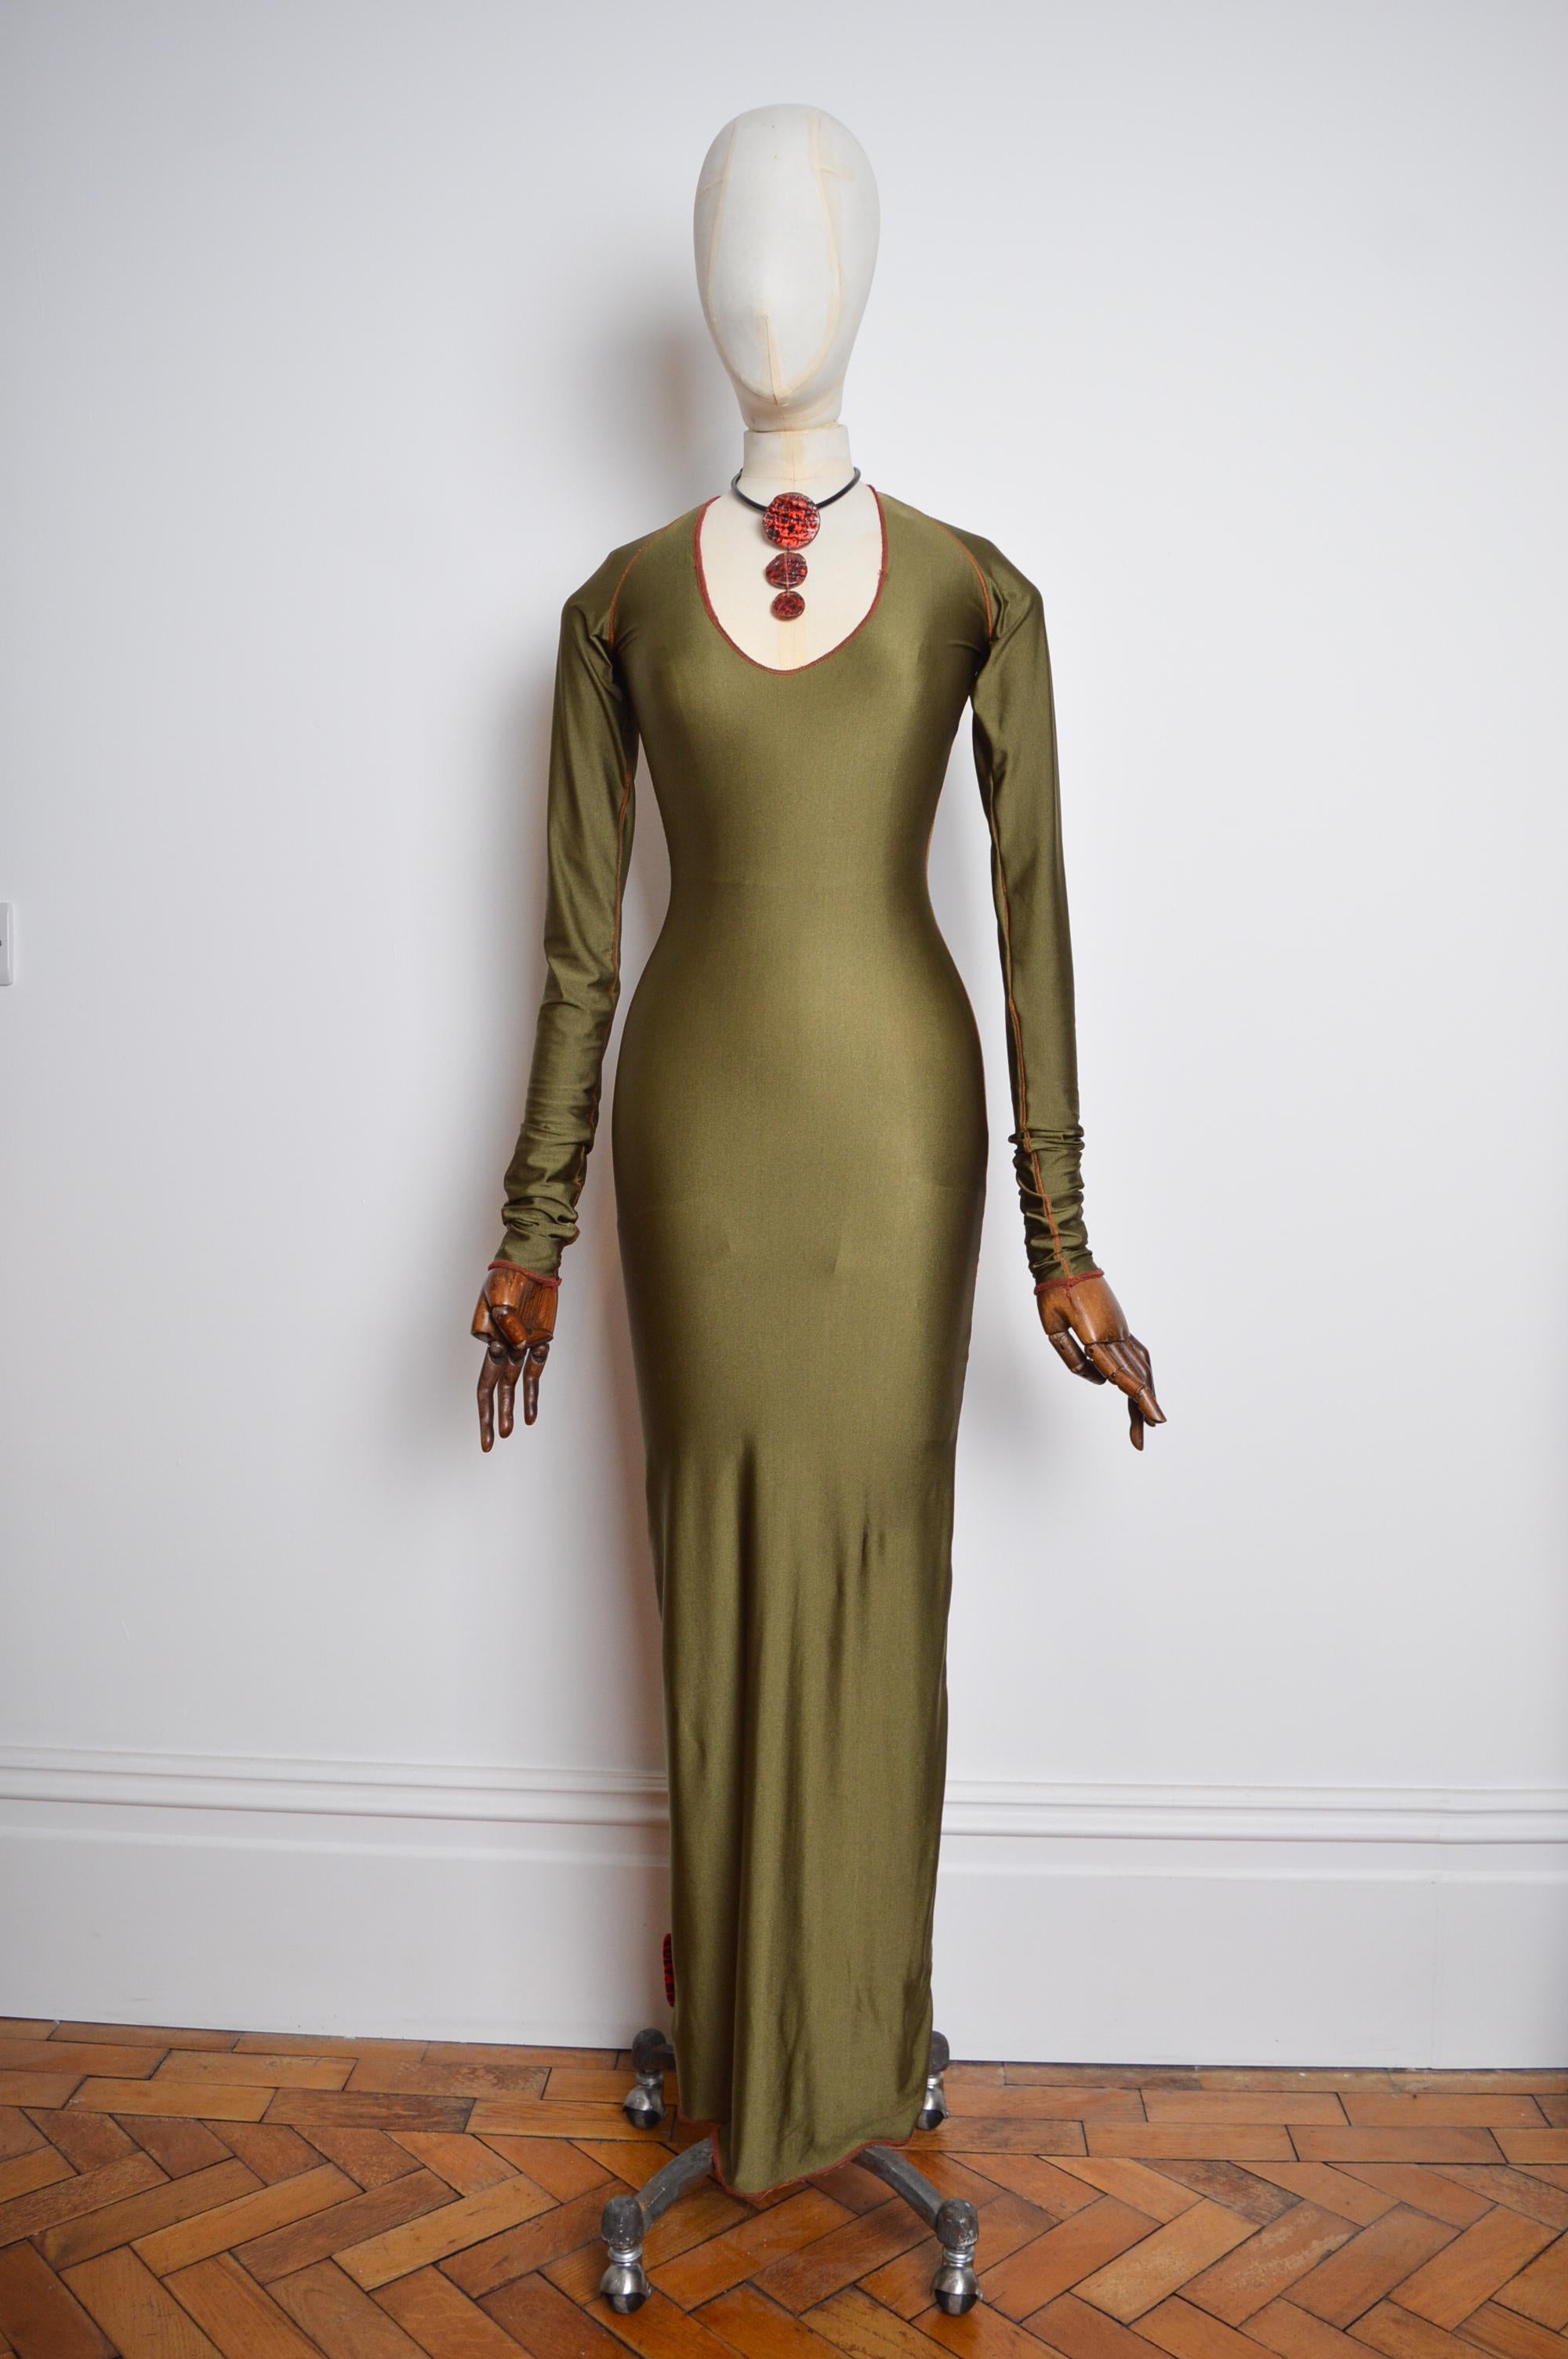 Beautiful Vintage, early 1990's long sleeved Khaki green maxi Dress by XÜLY BET. 

This Technical style, long sleeved full length Dress is made from a super stretchy swim suit style material in a Khaki 'Olive' shade with contrasting Orange